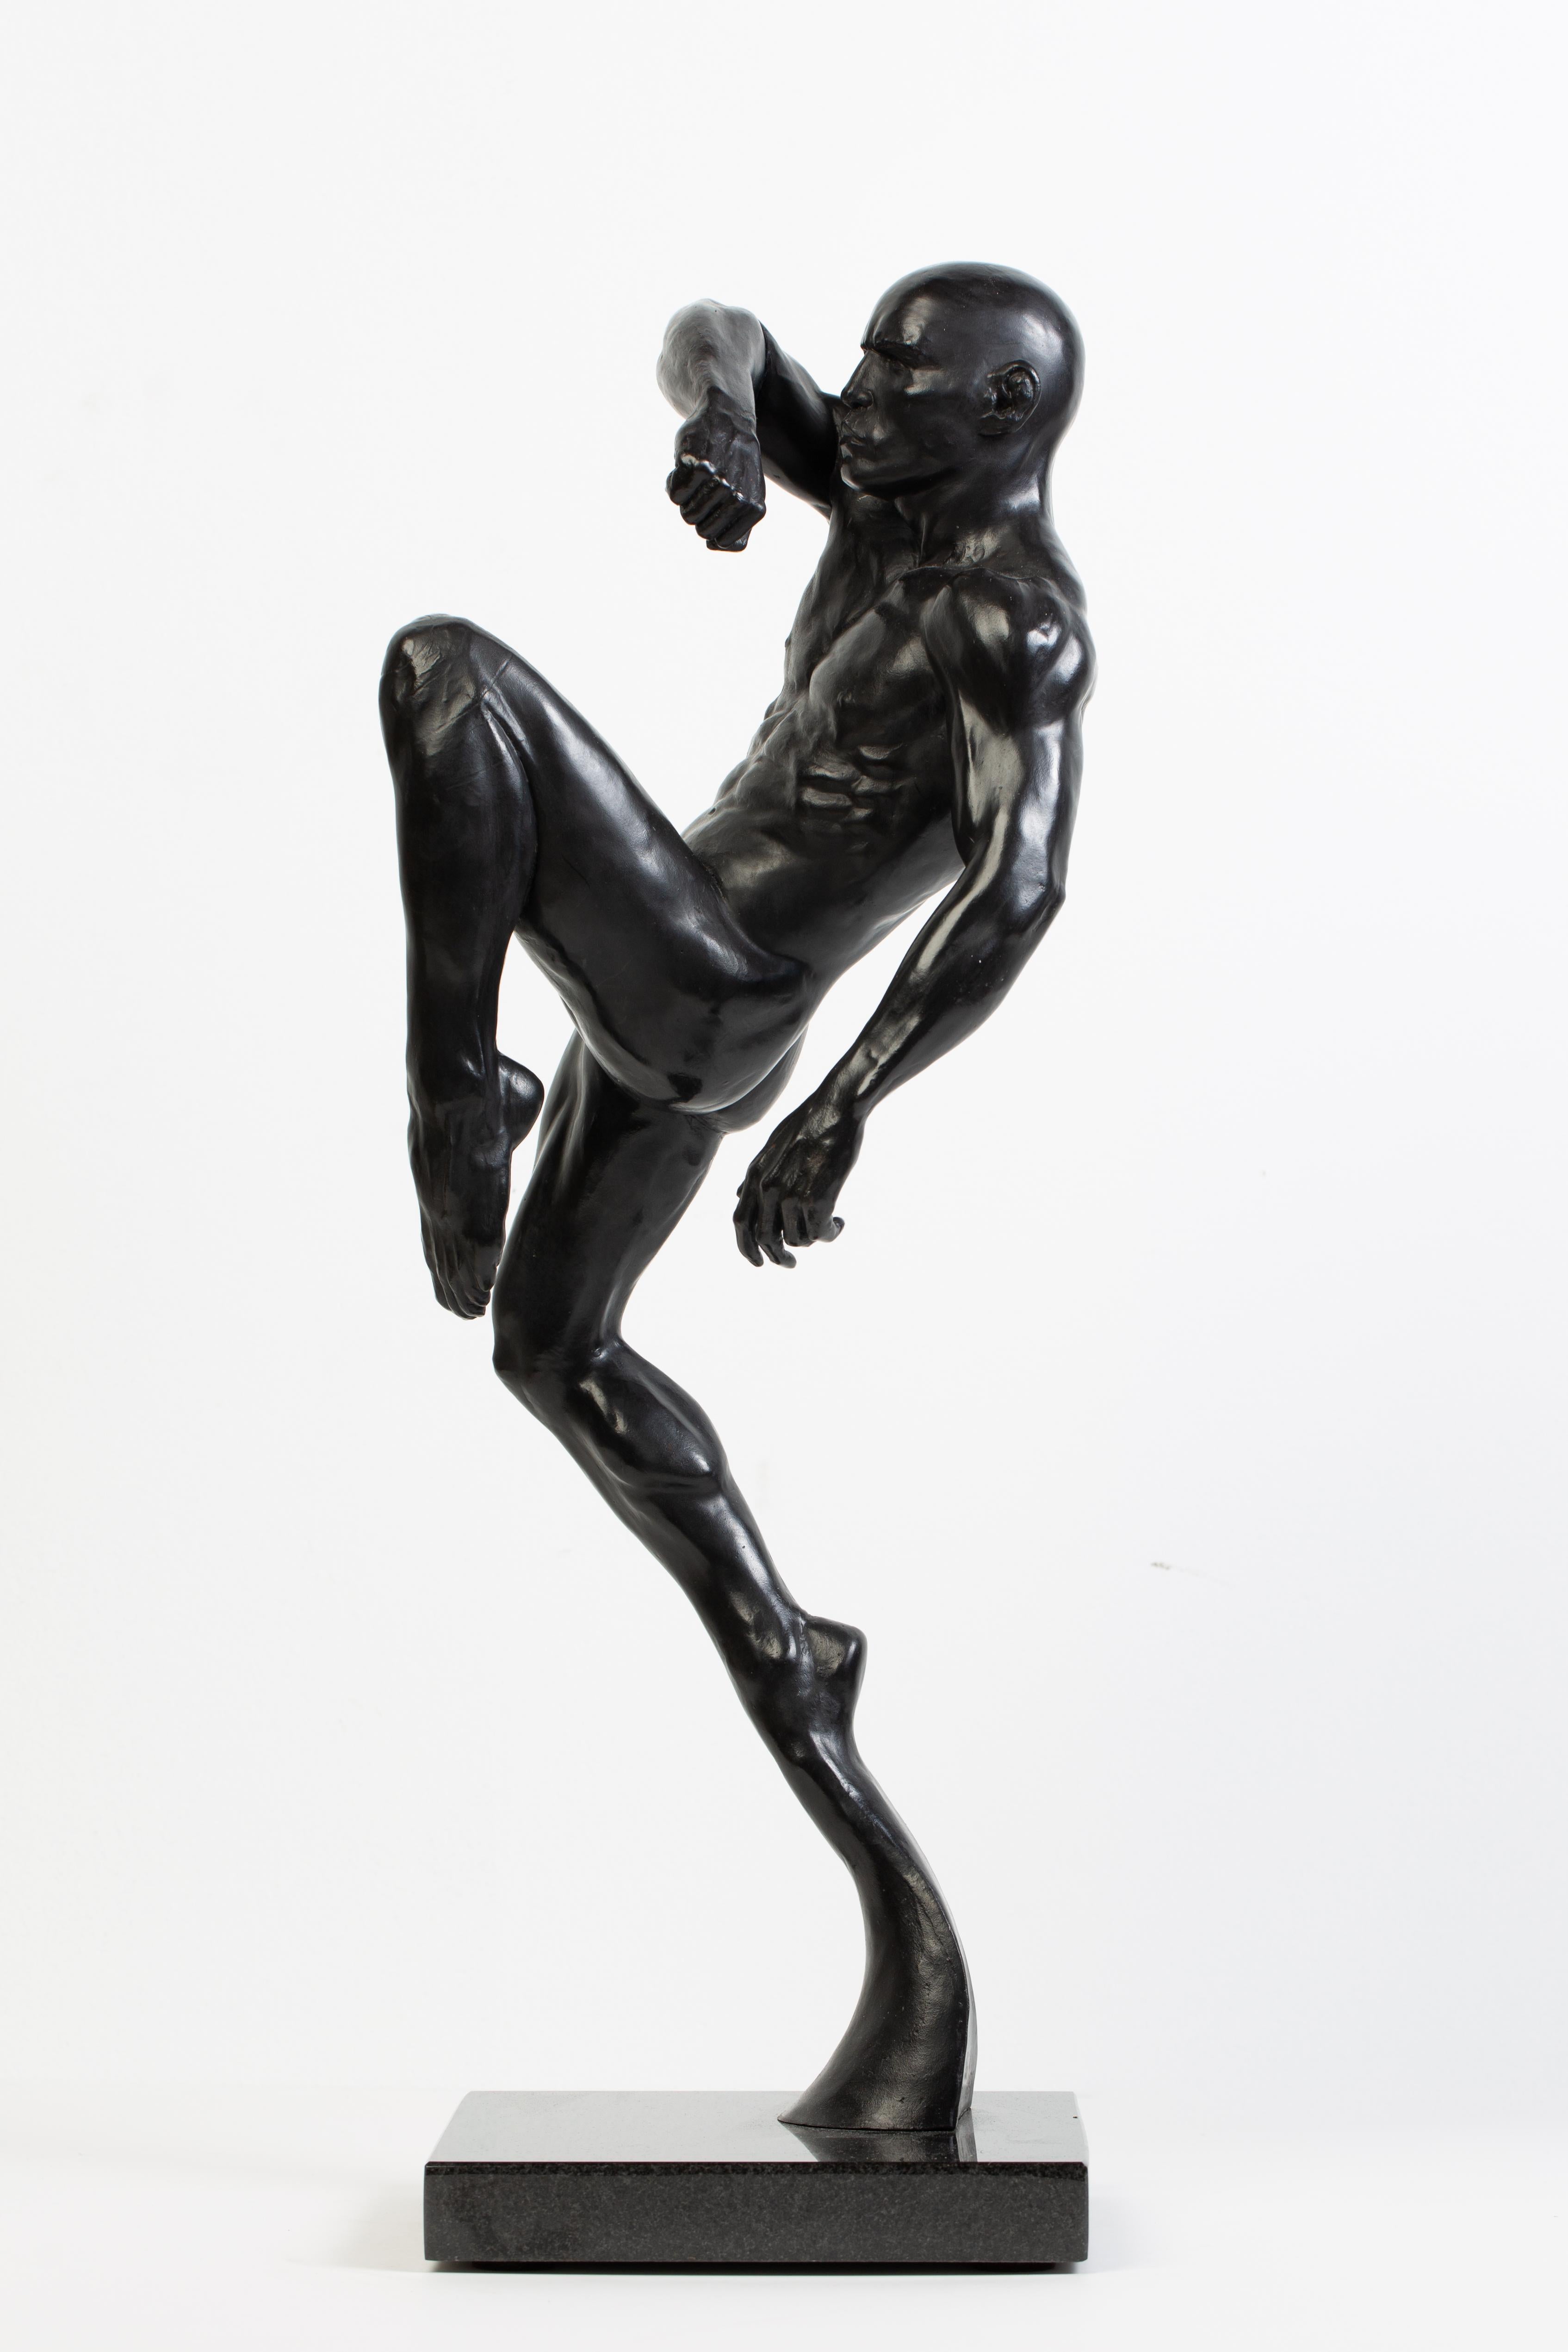 This Impact - Contemporary Bronze Nude Male Sculpture in Action Pose